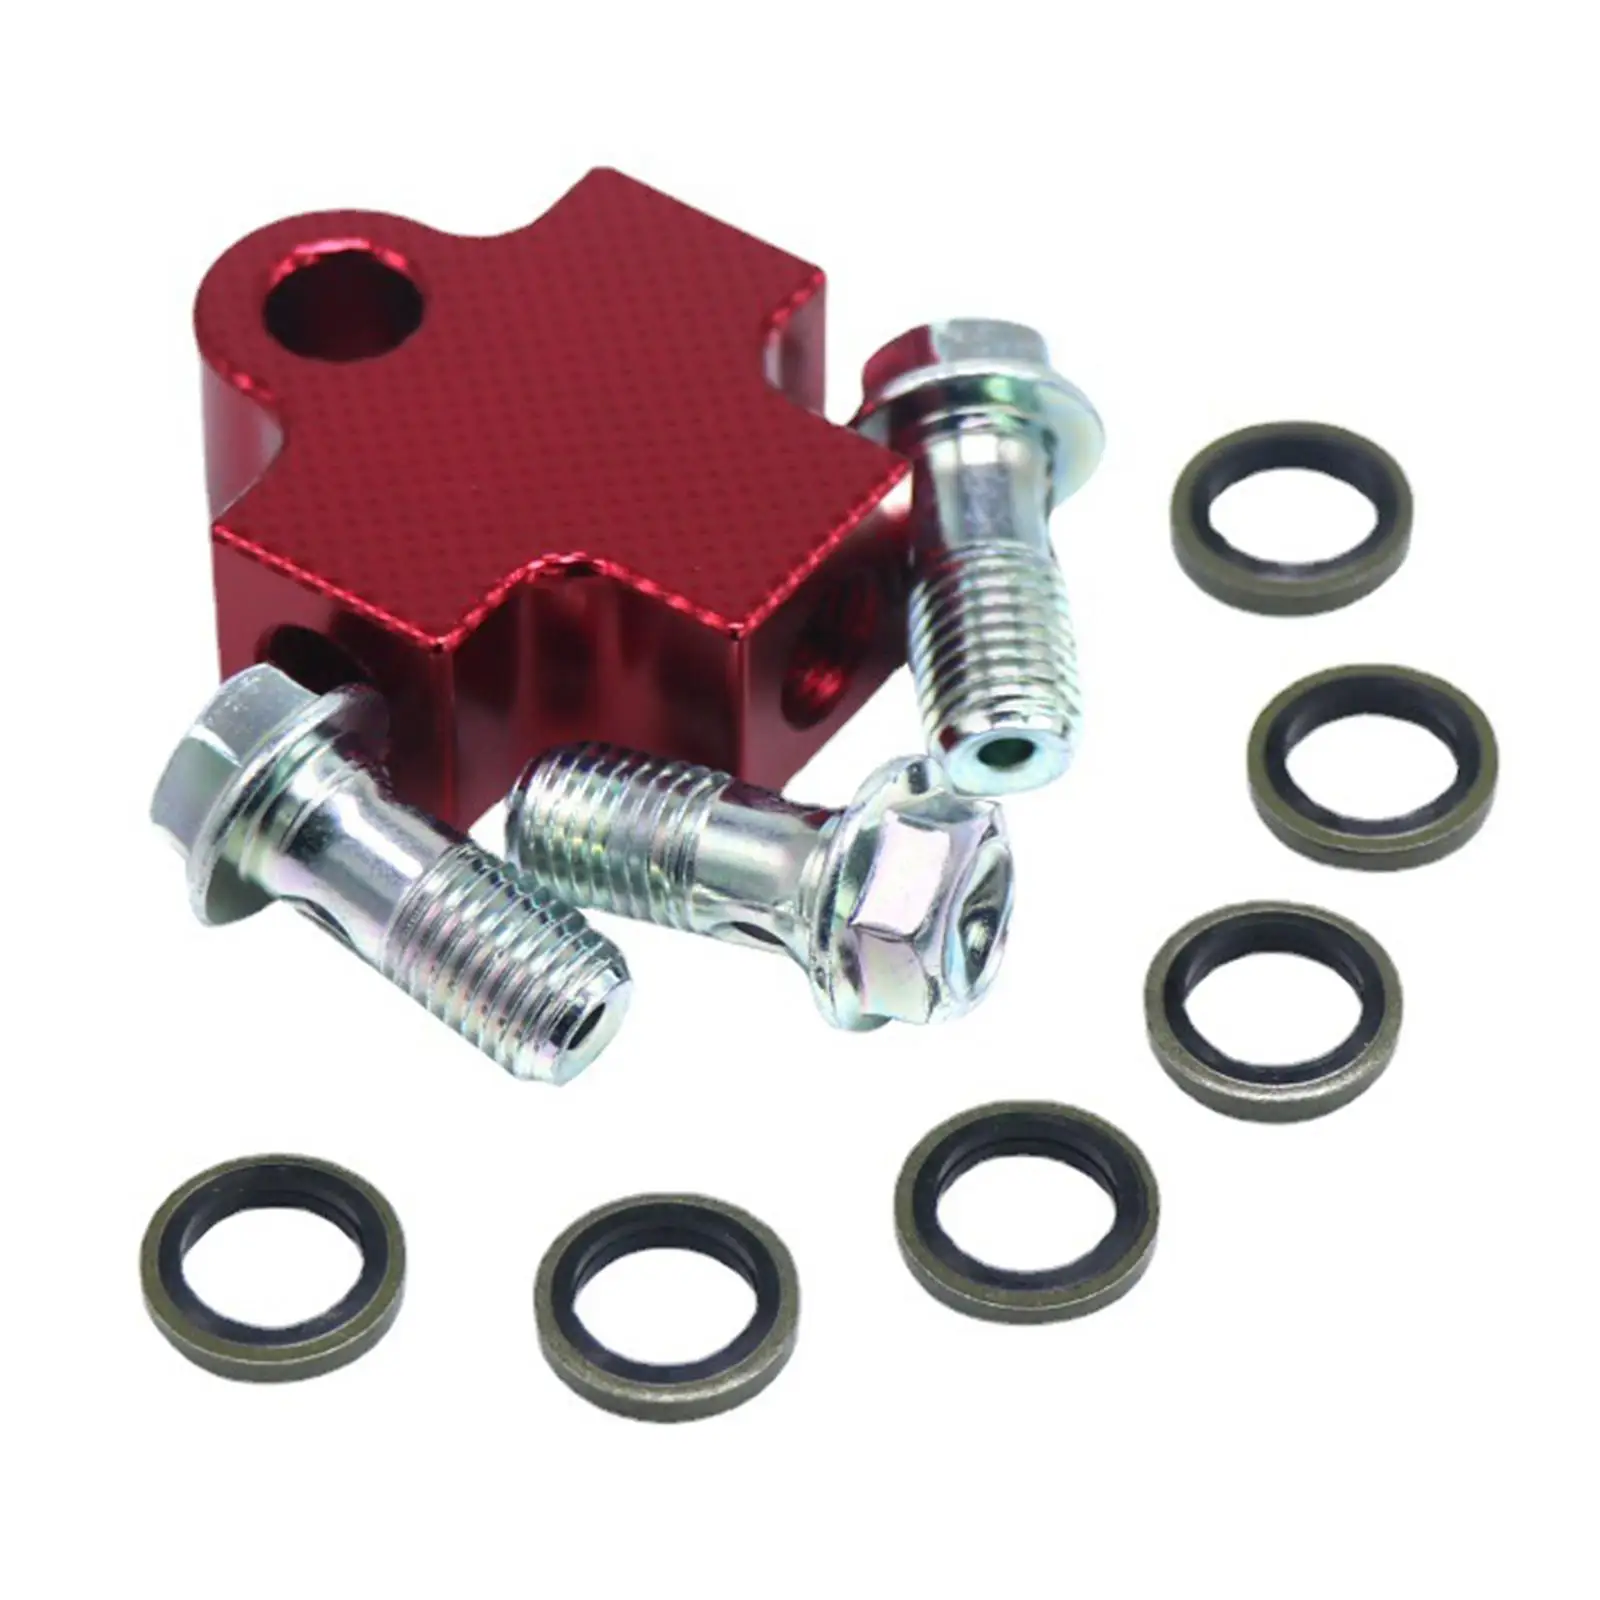 Brake Oil Hose Hydraulic Pipe 3 Way Connector, Tubes Adapter for Dirt Bike Red